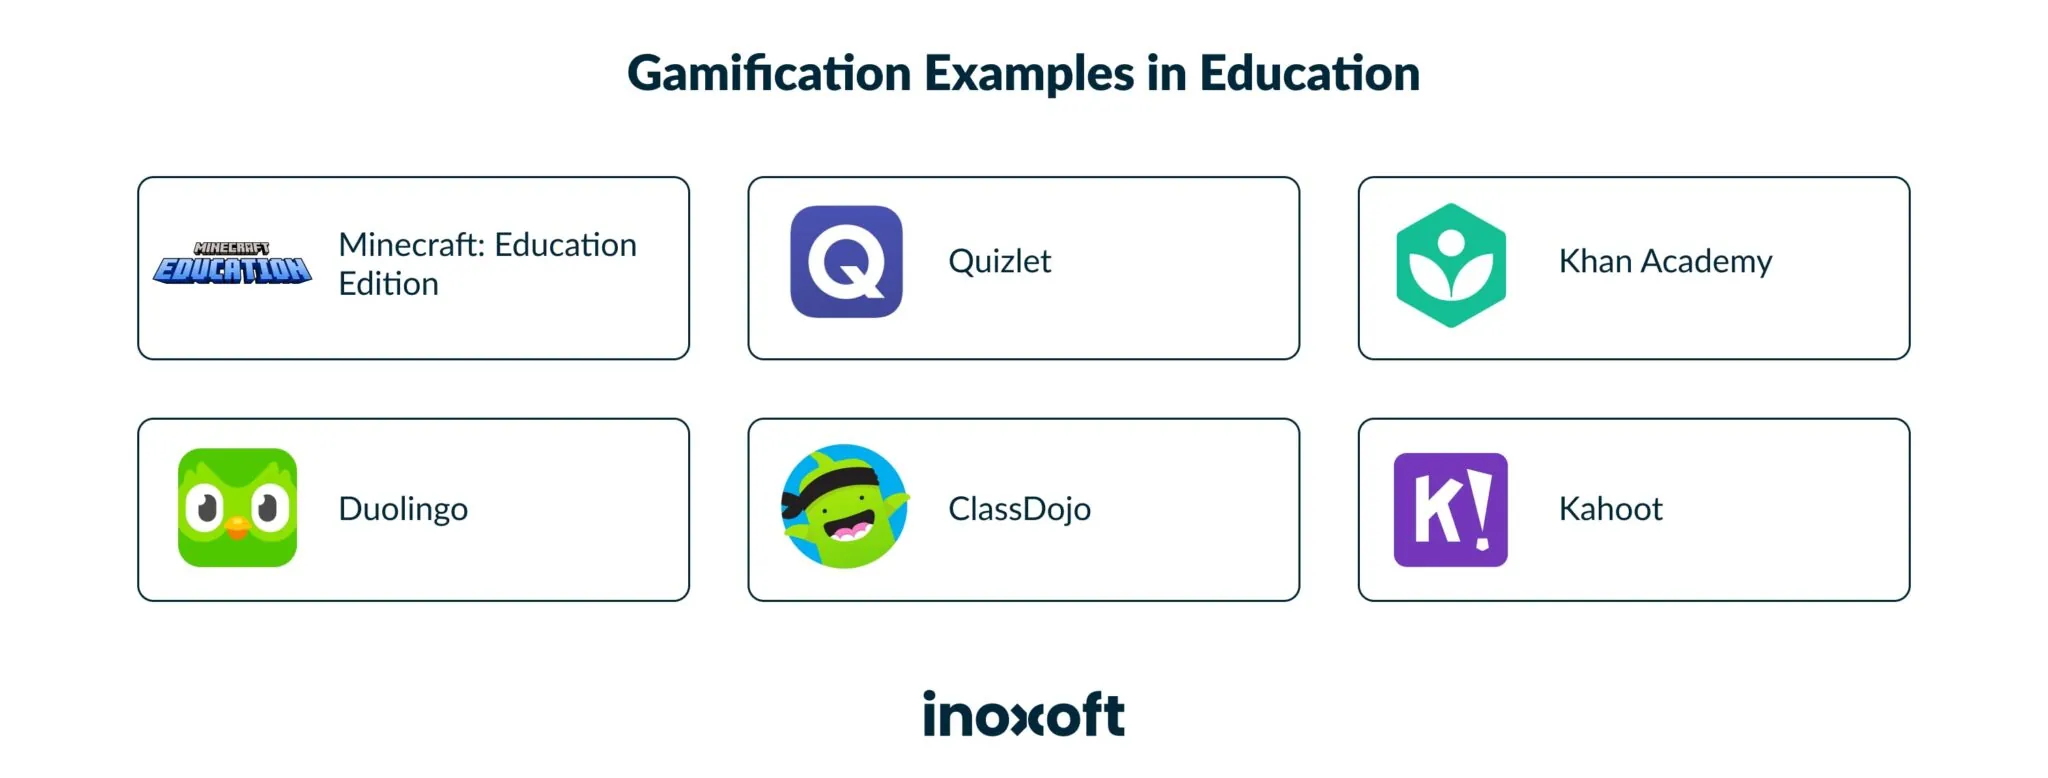 Examples of Gamification in education